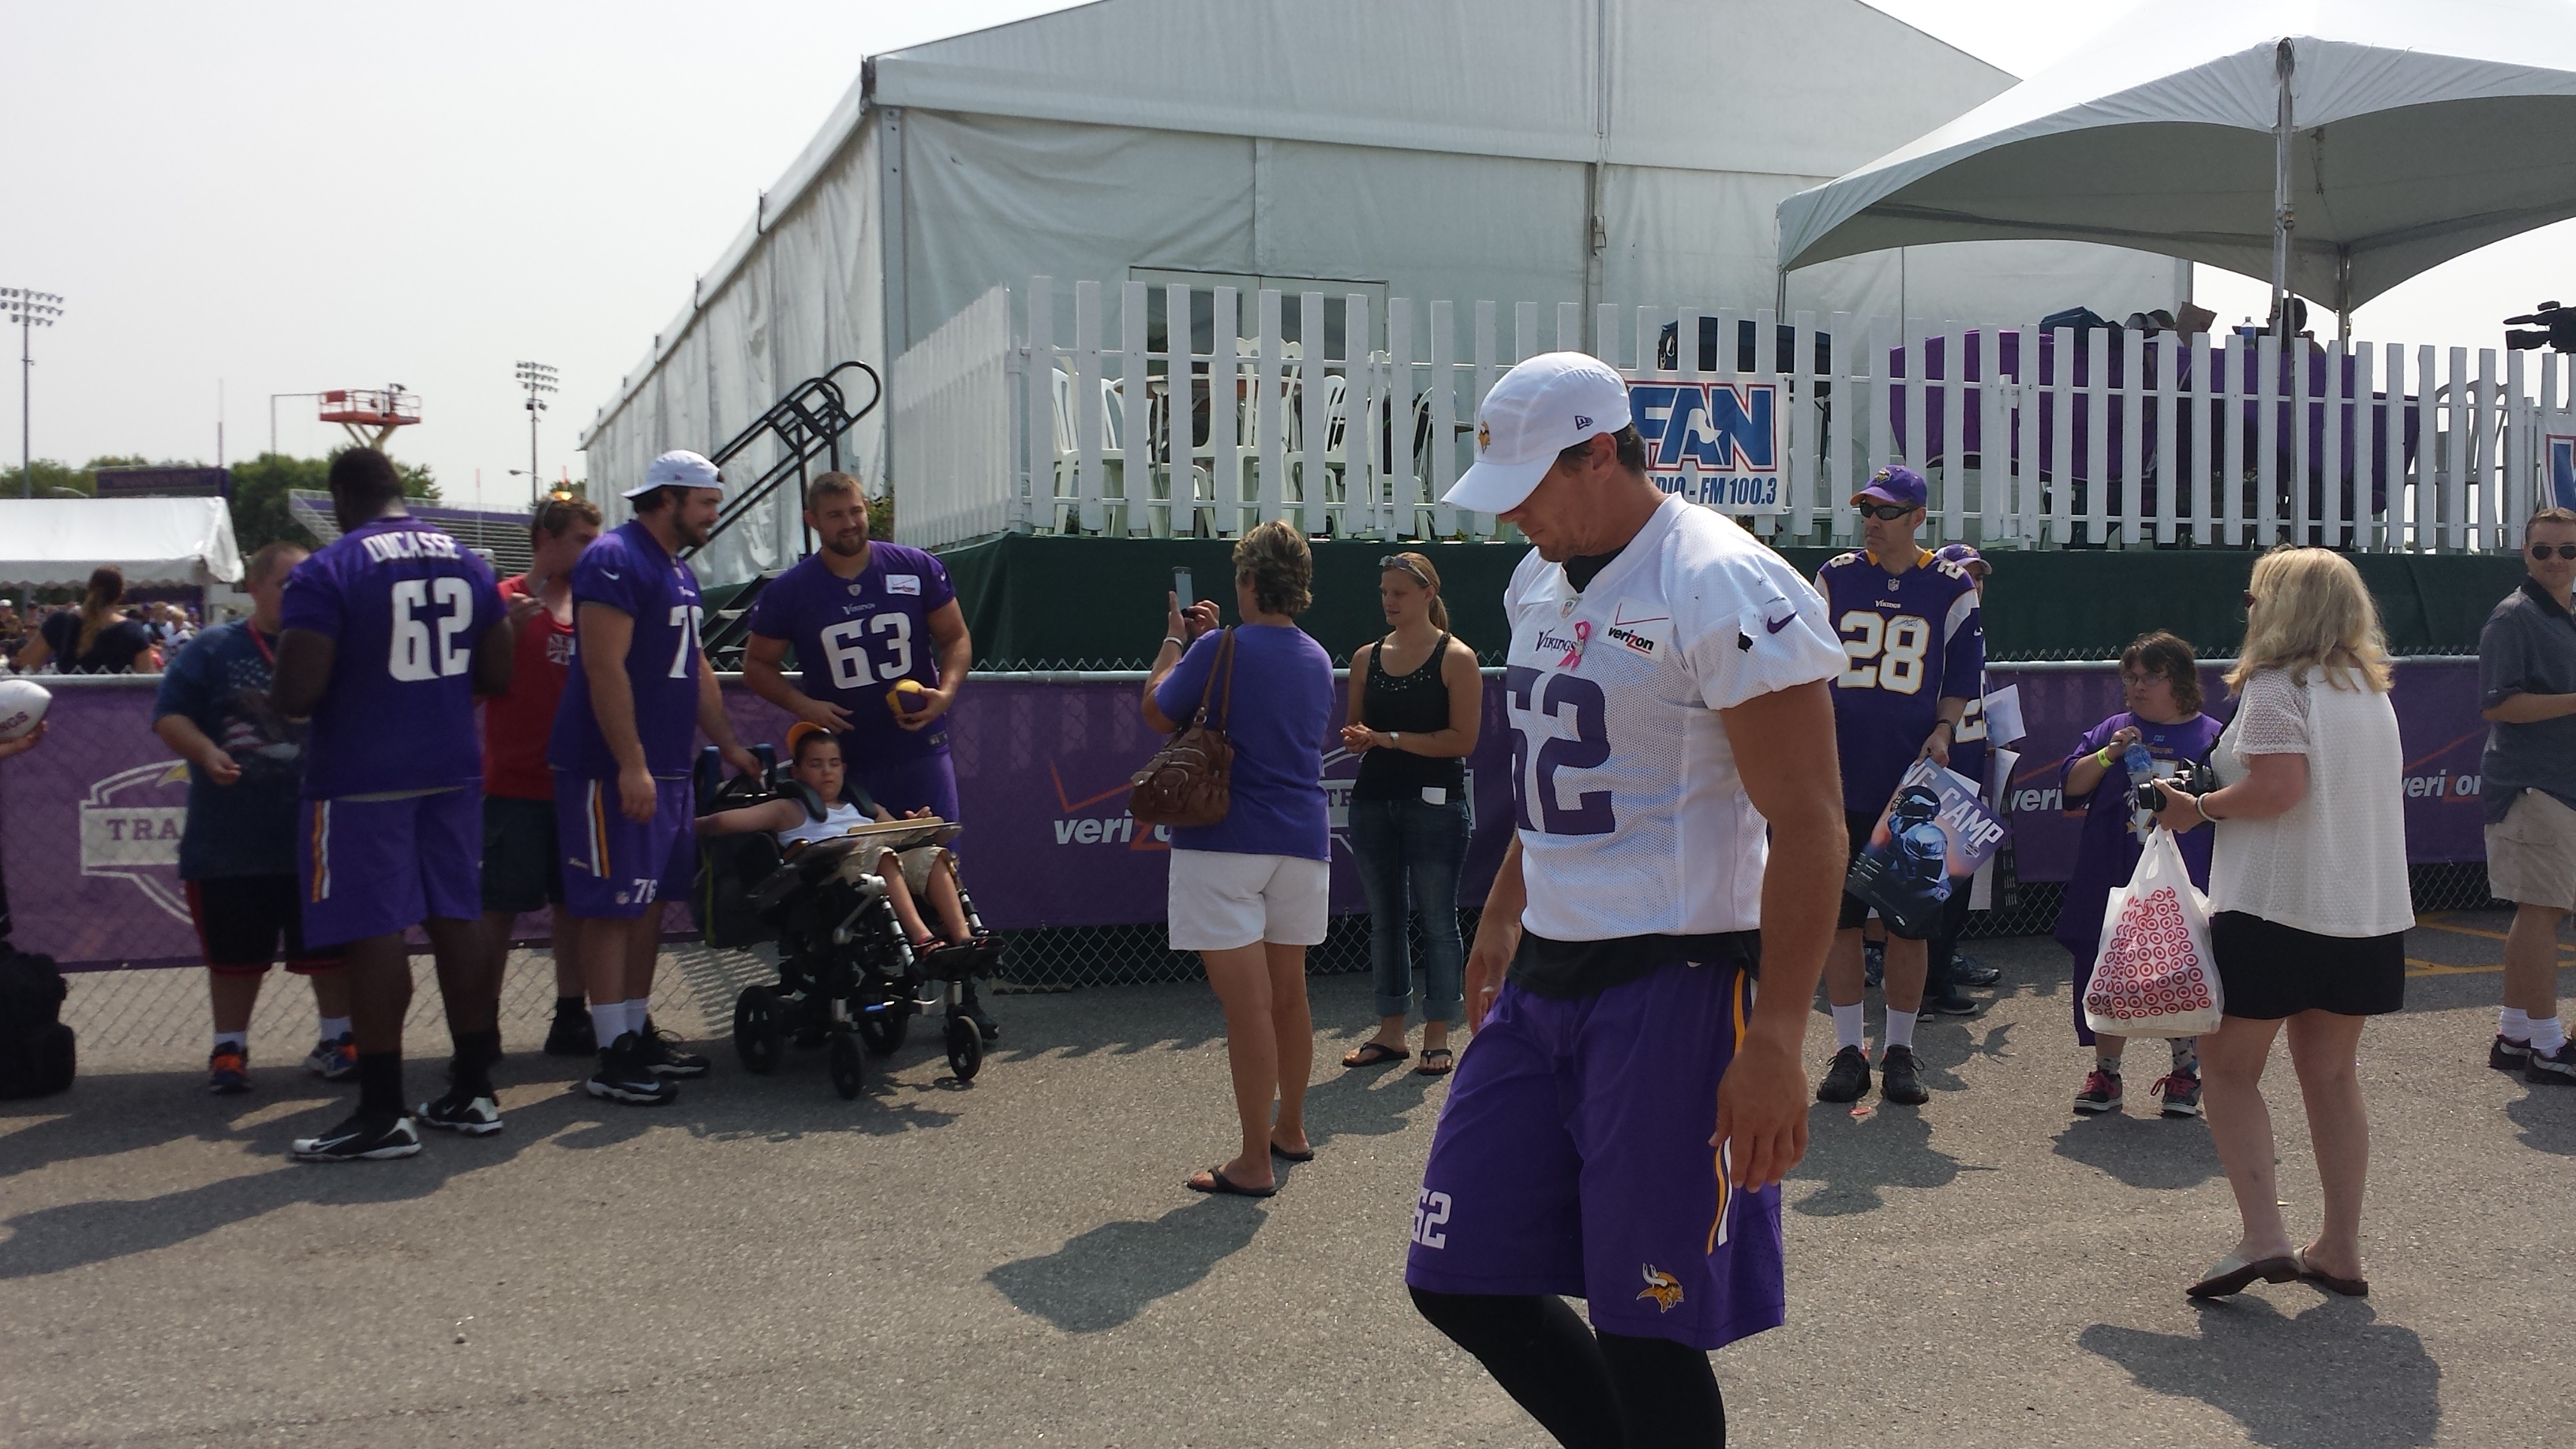 Chad Greenway will be relied upon to lead the Vikings' defense